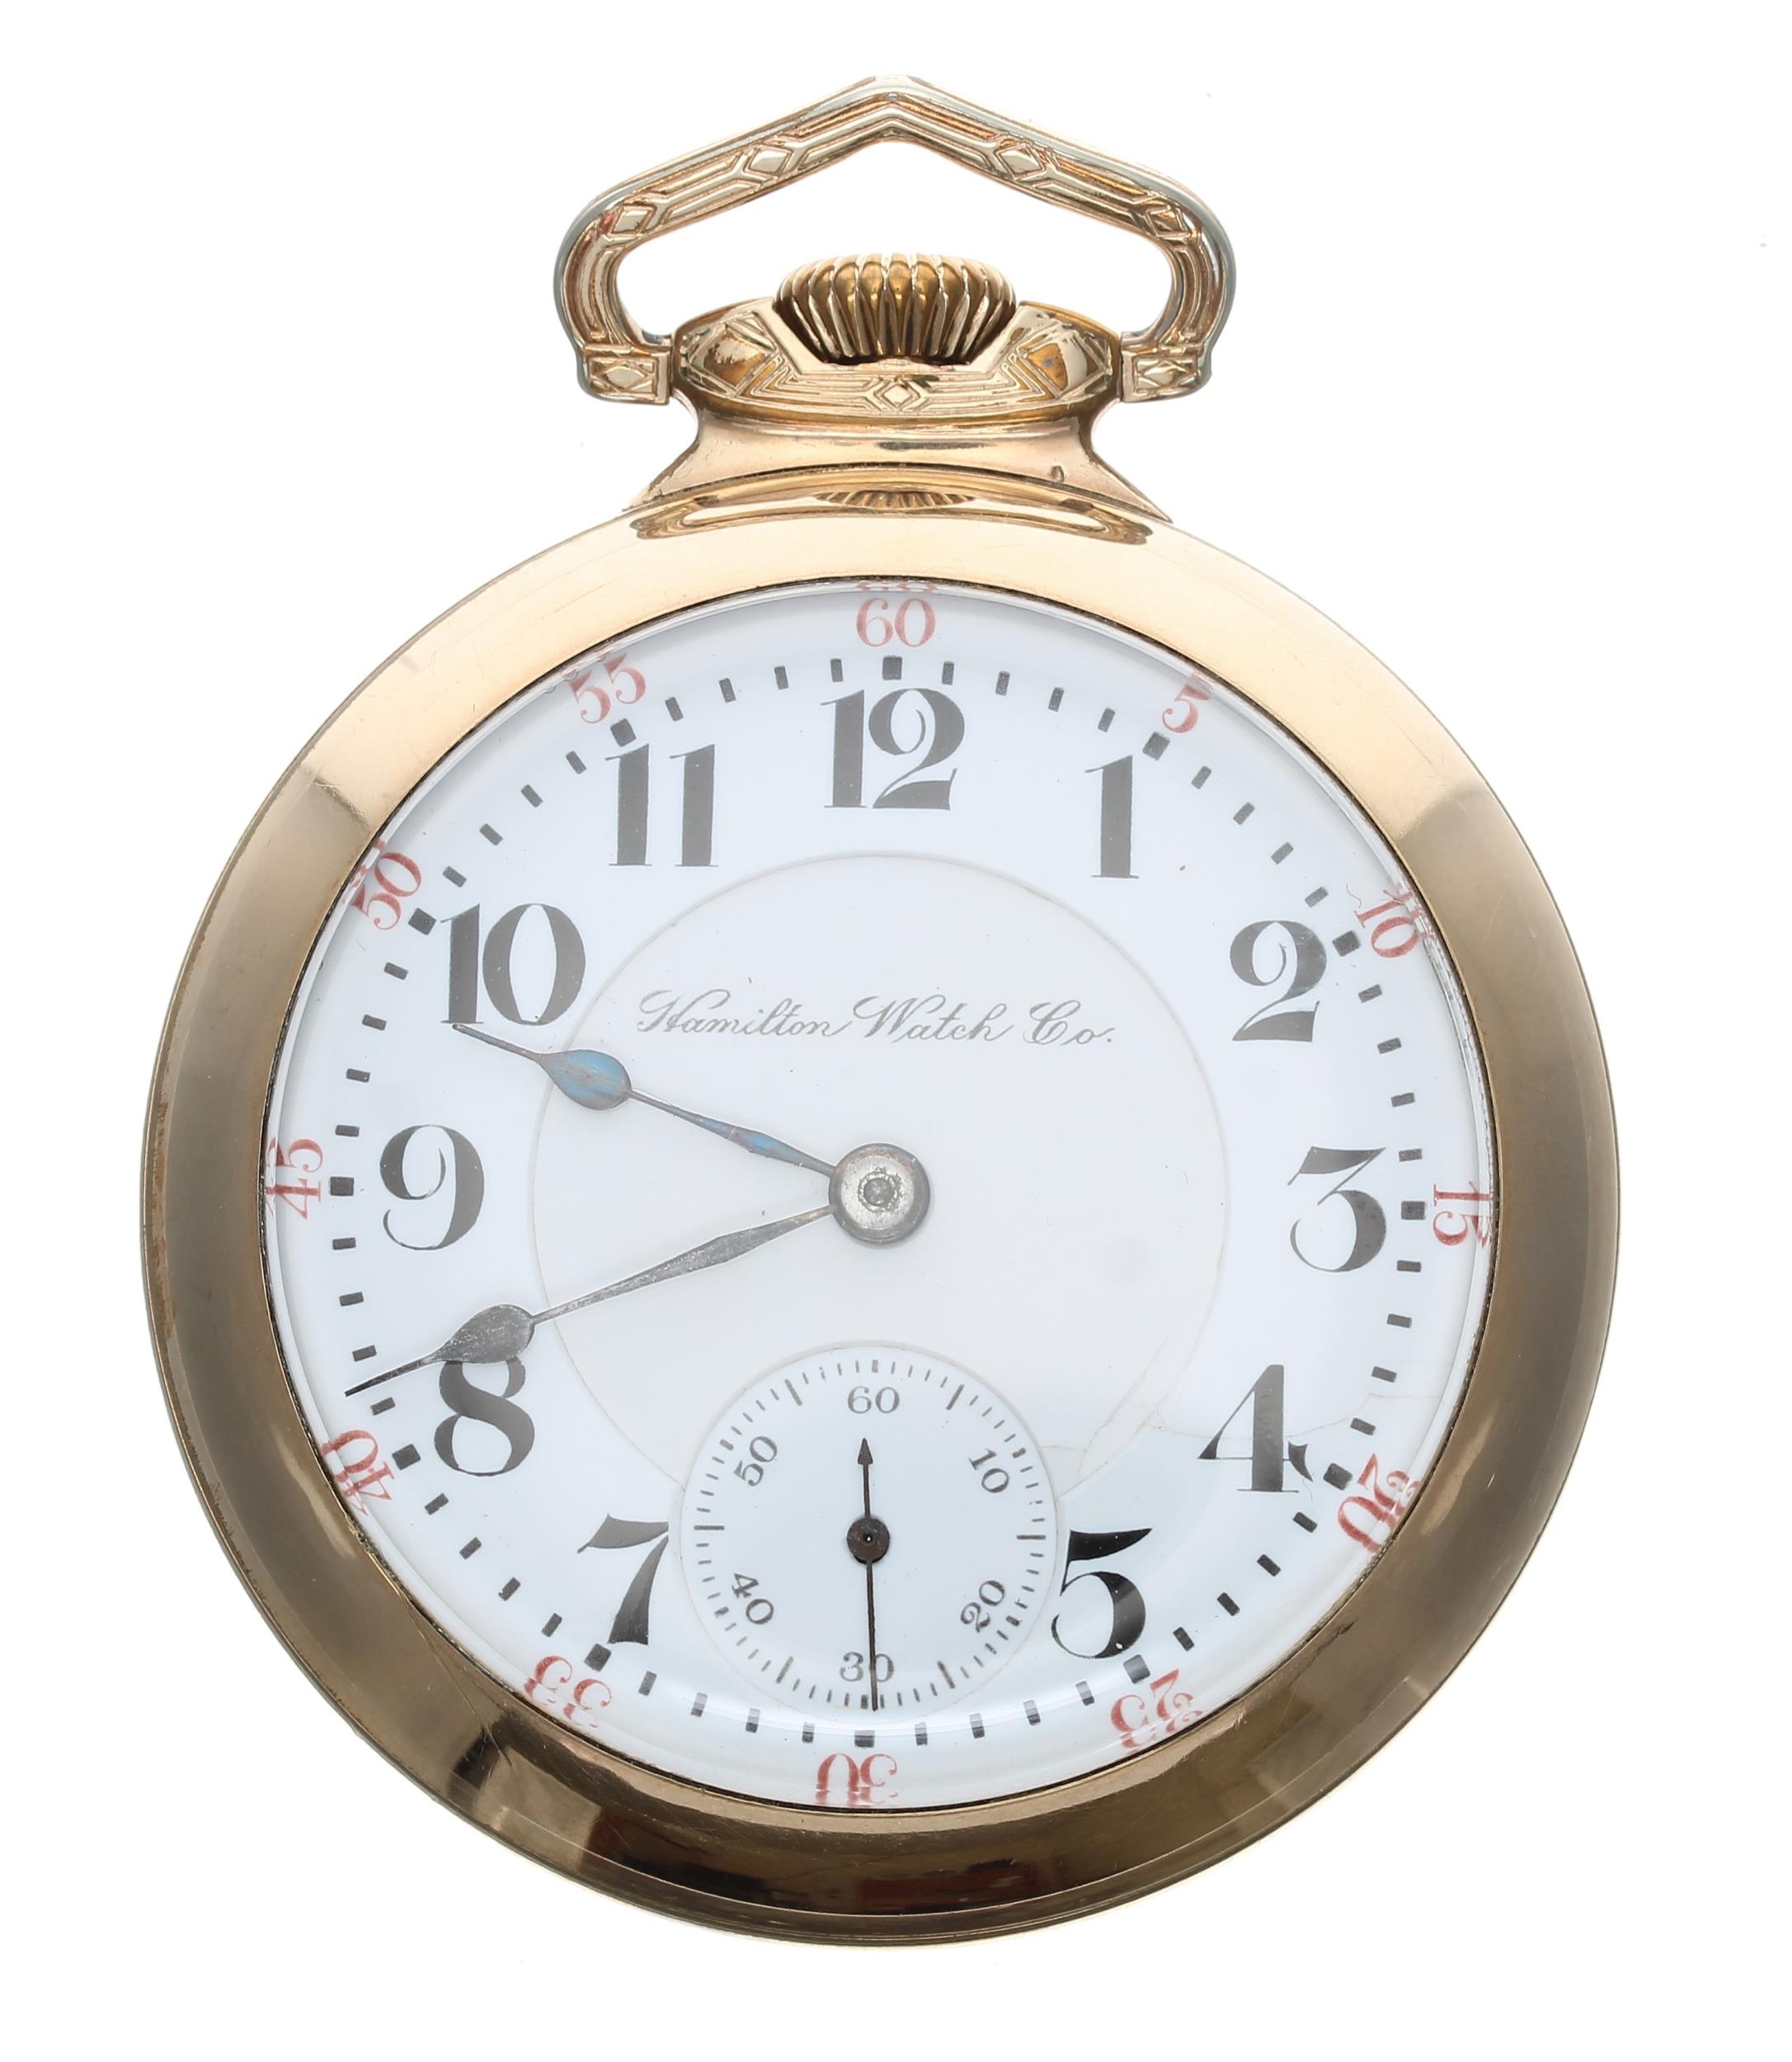 Hamilton Watch Co. gold plated lever set pocket watch, circa 1907, signed 940 21 jewel adjusted 5 - Image 2 of 4